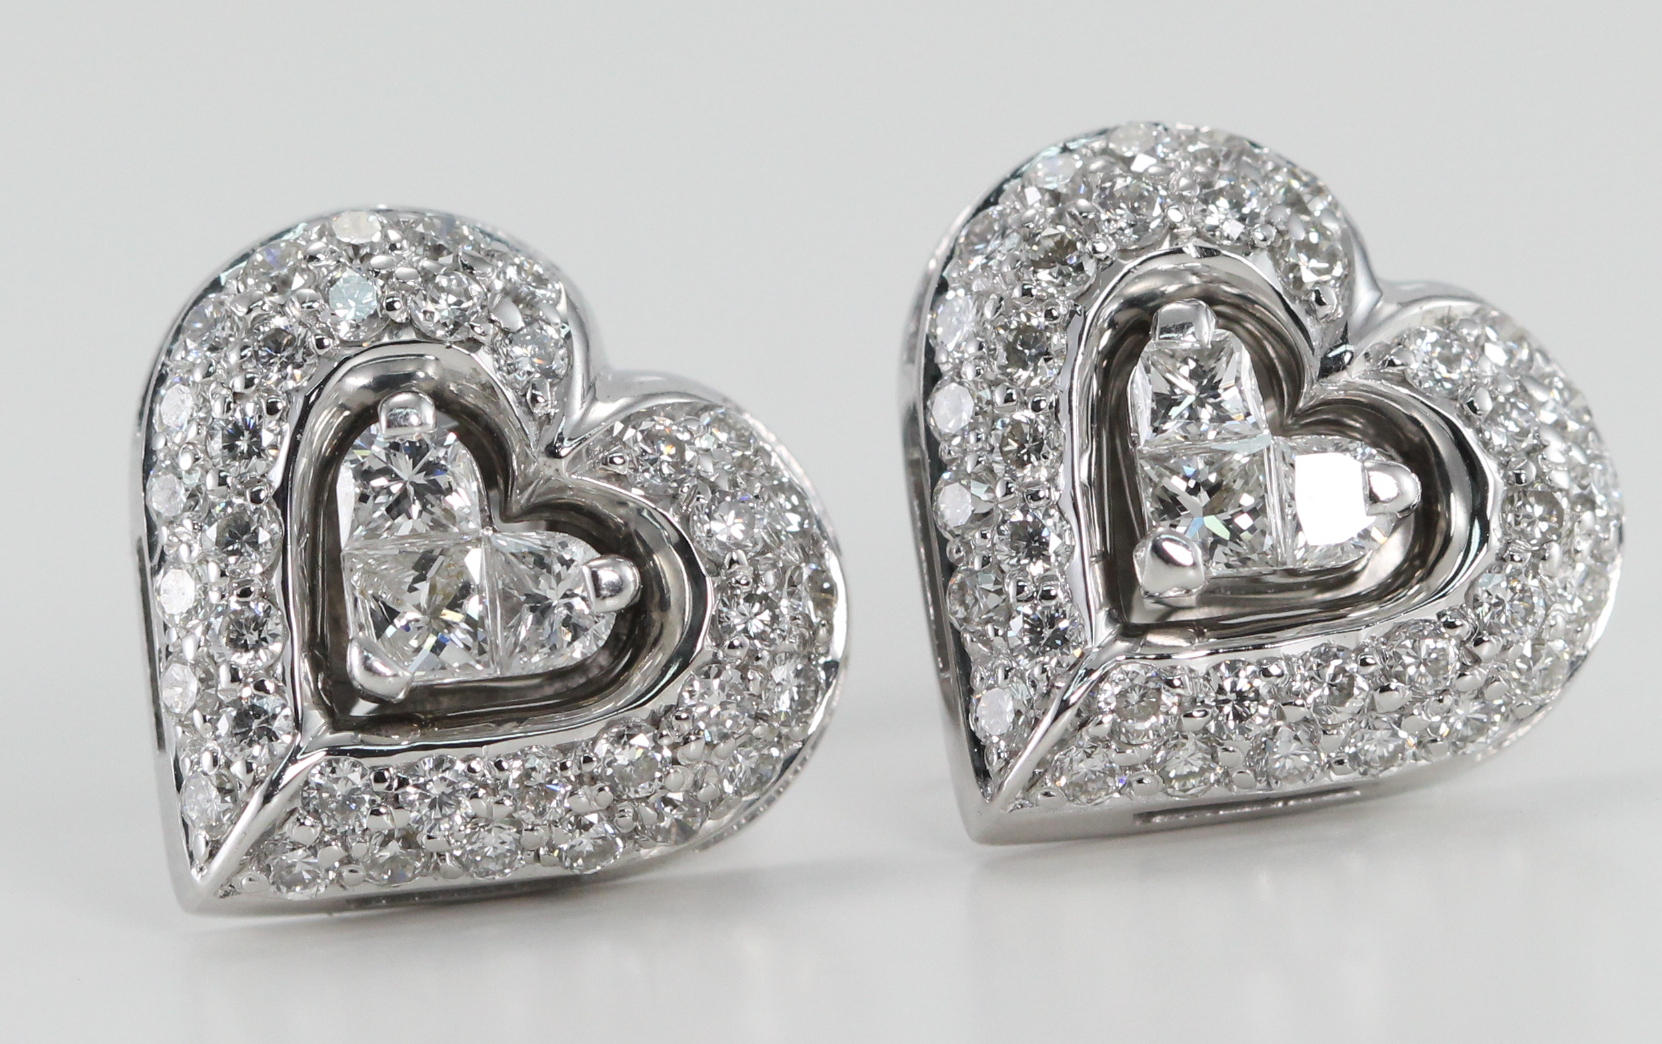 18k White Gold Invisible Setting Princess & Round Cut Diamond Heart Earrings (0.75 Ct, H Color, SI2 Clarity)